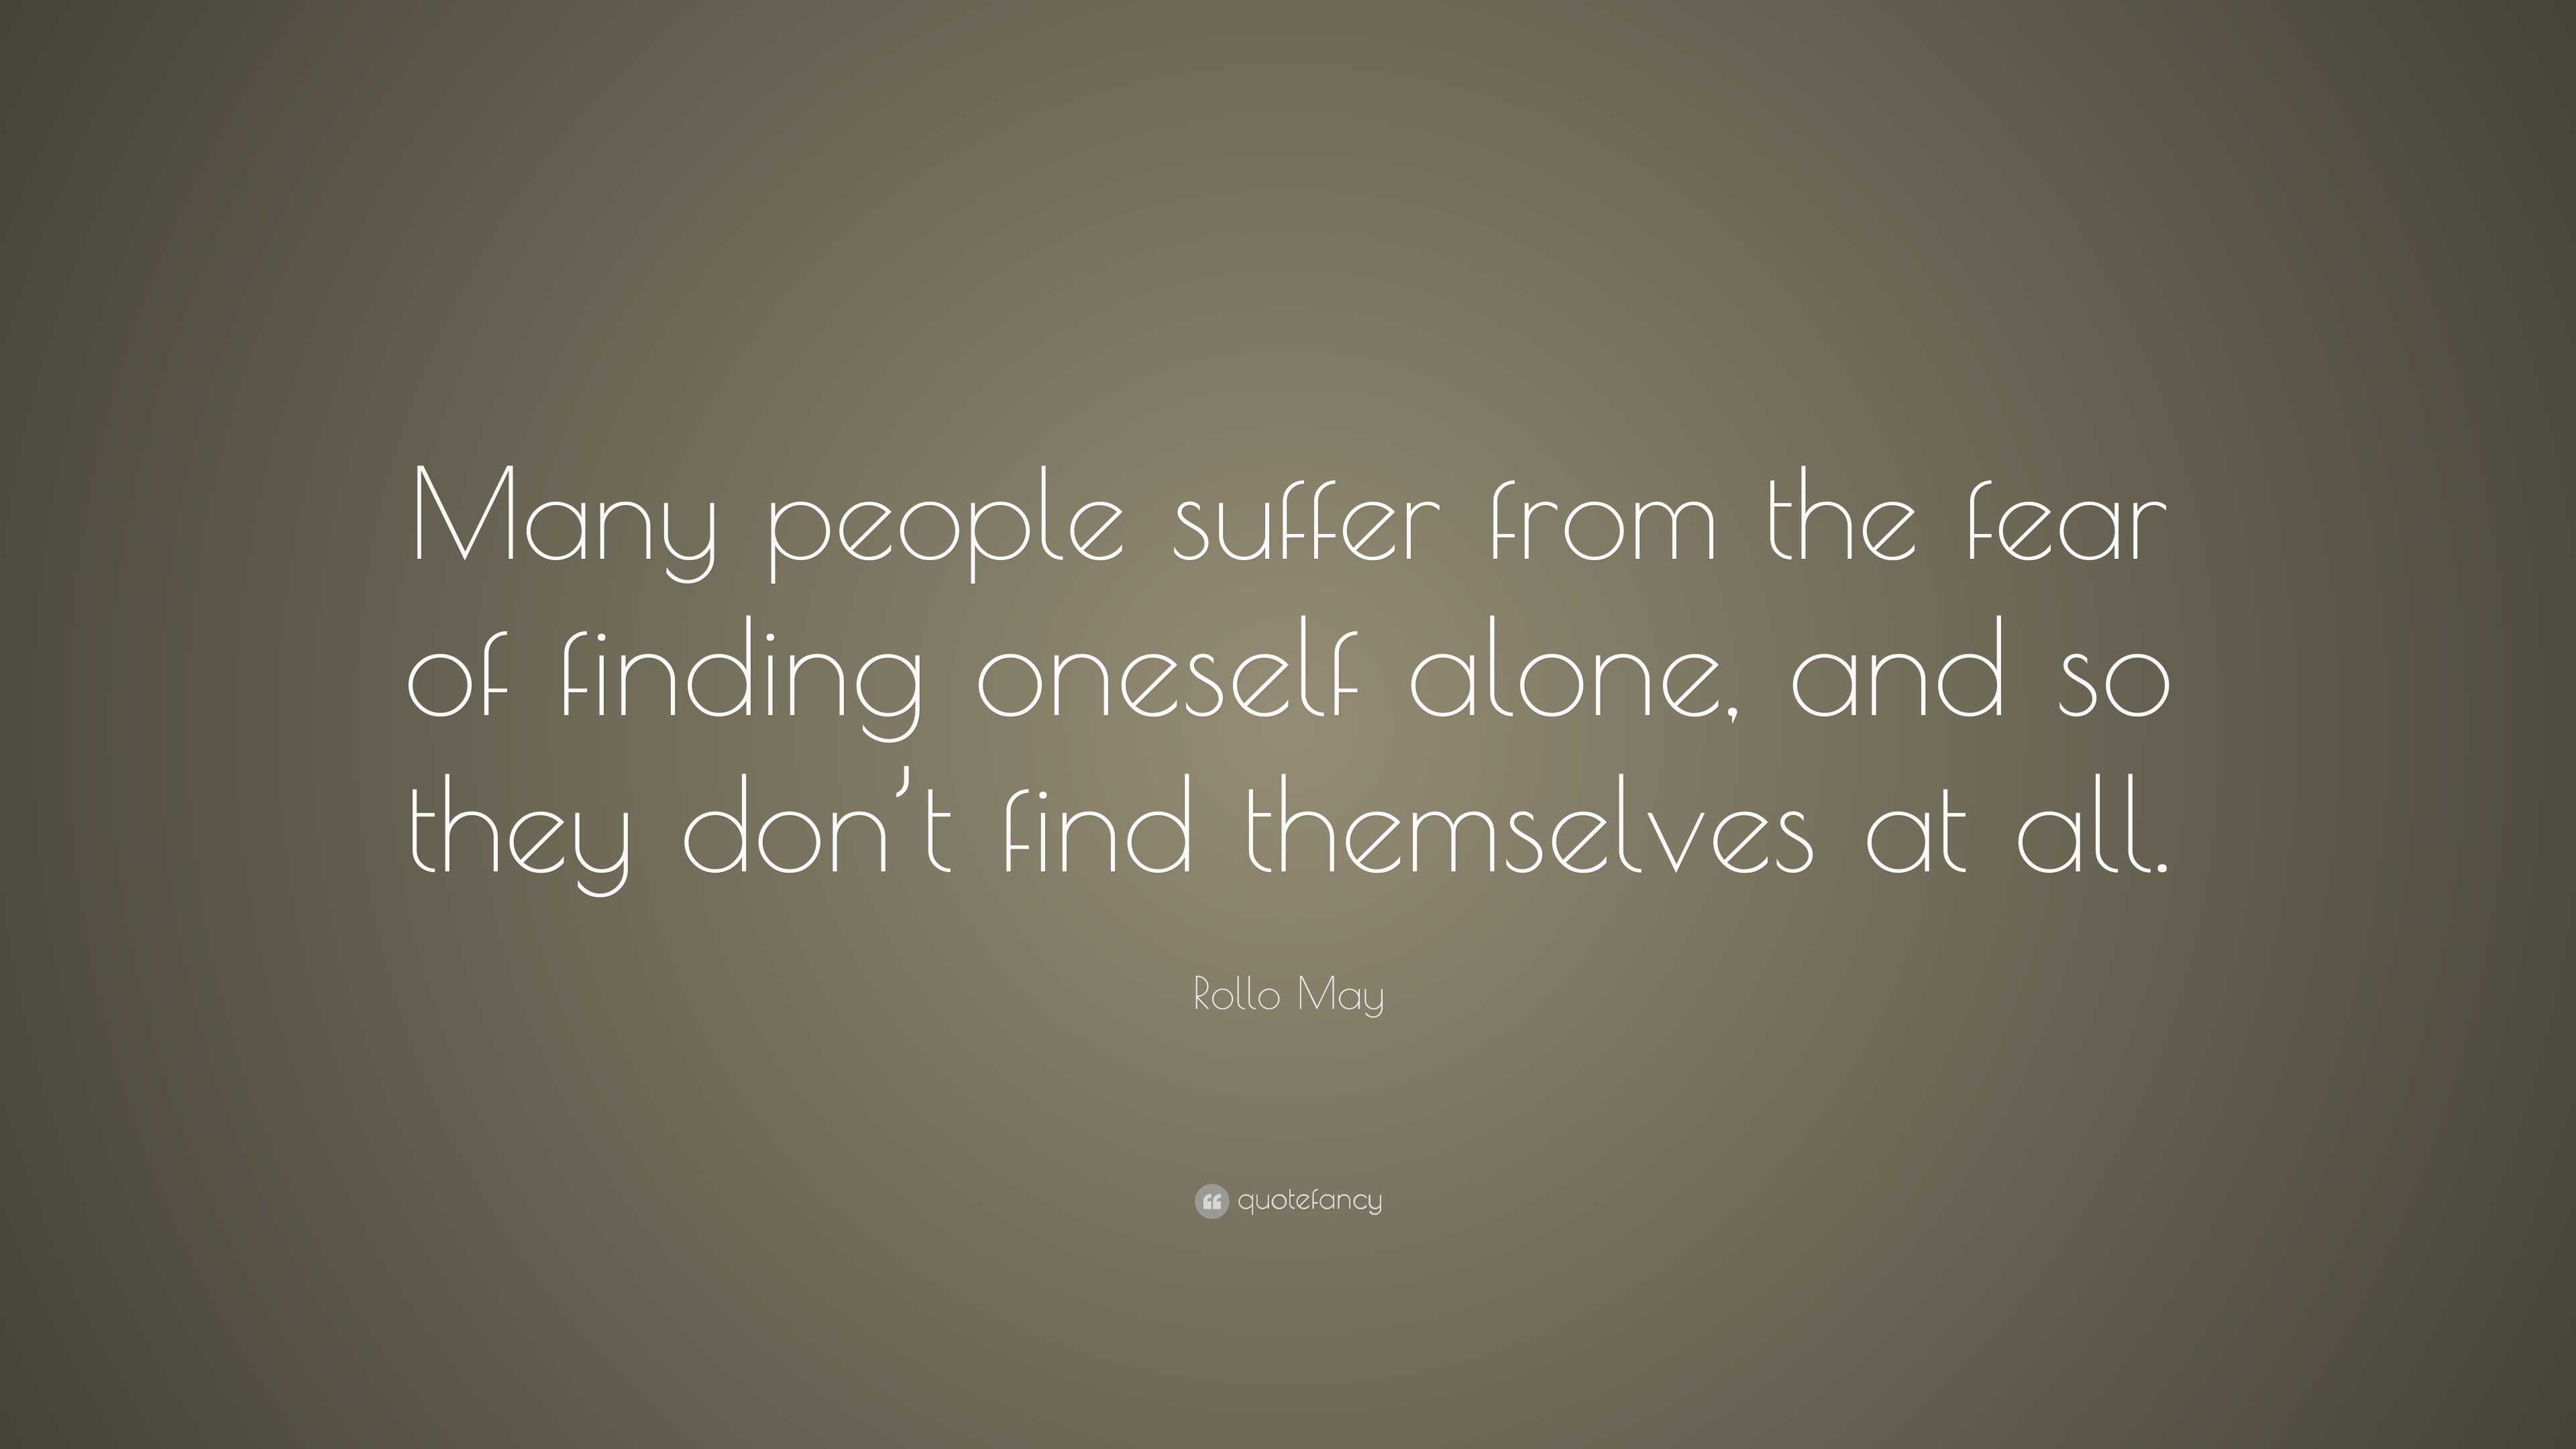 Rollo May Quote: “Many people suffer from the fear of finding oneself ...